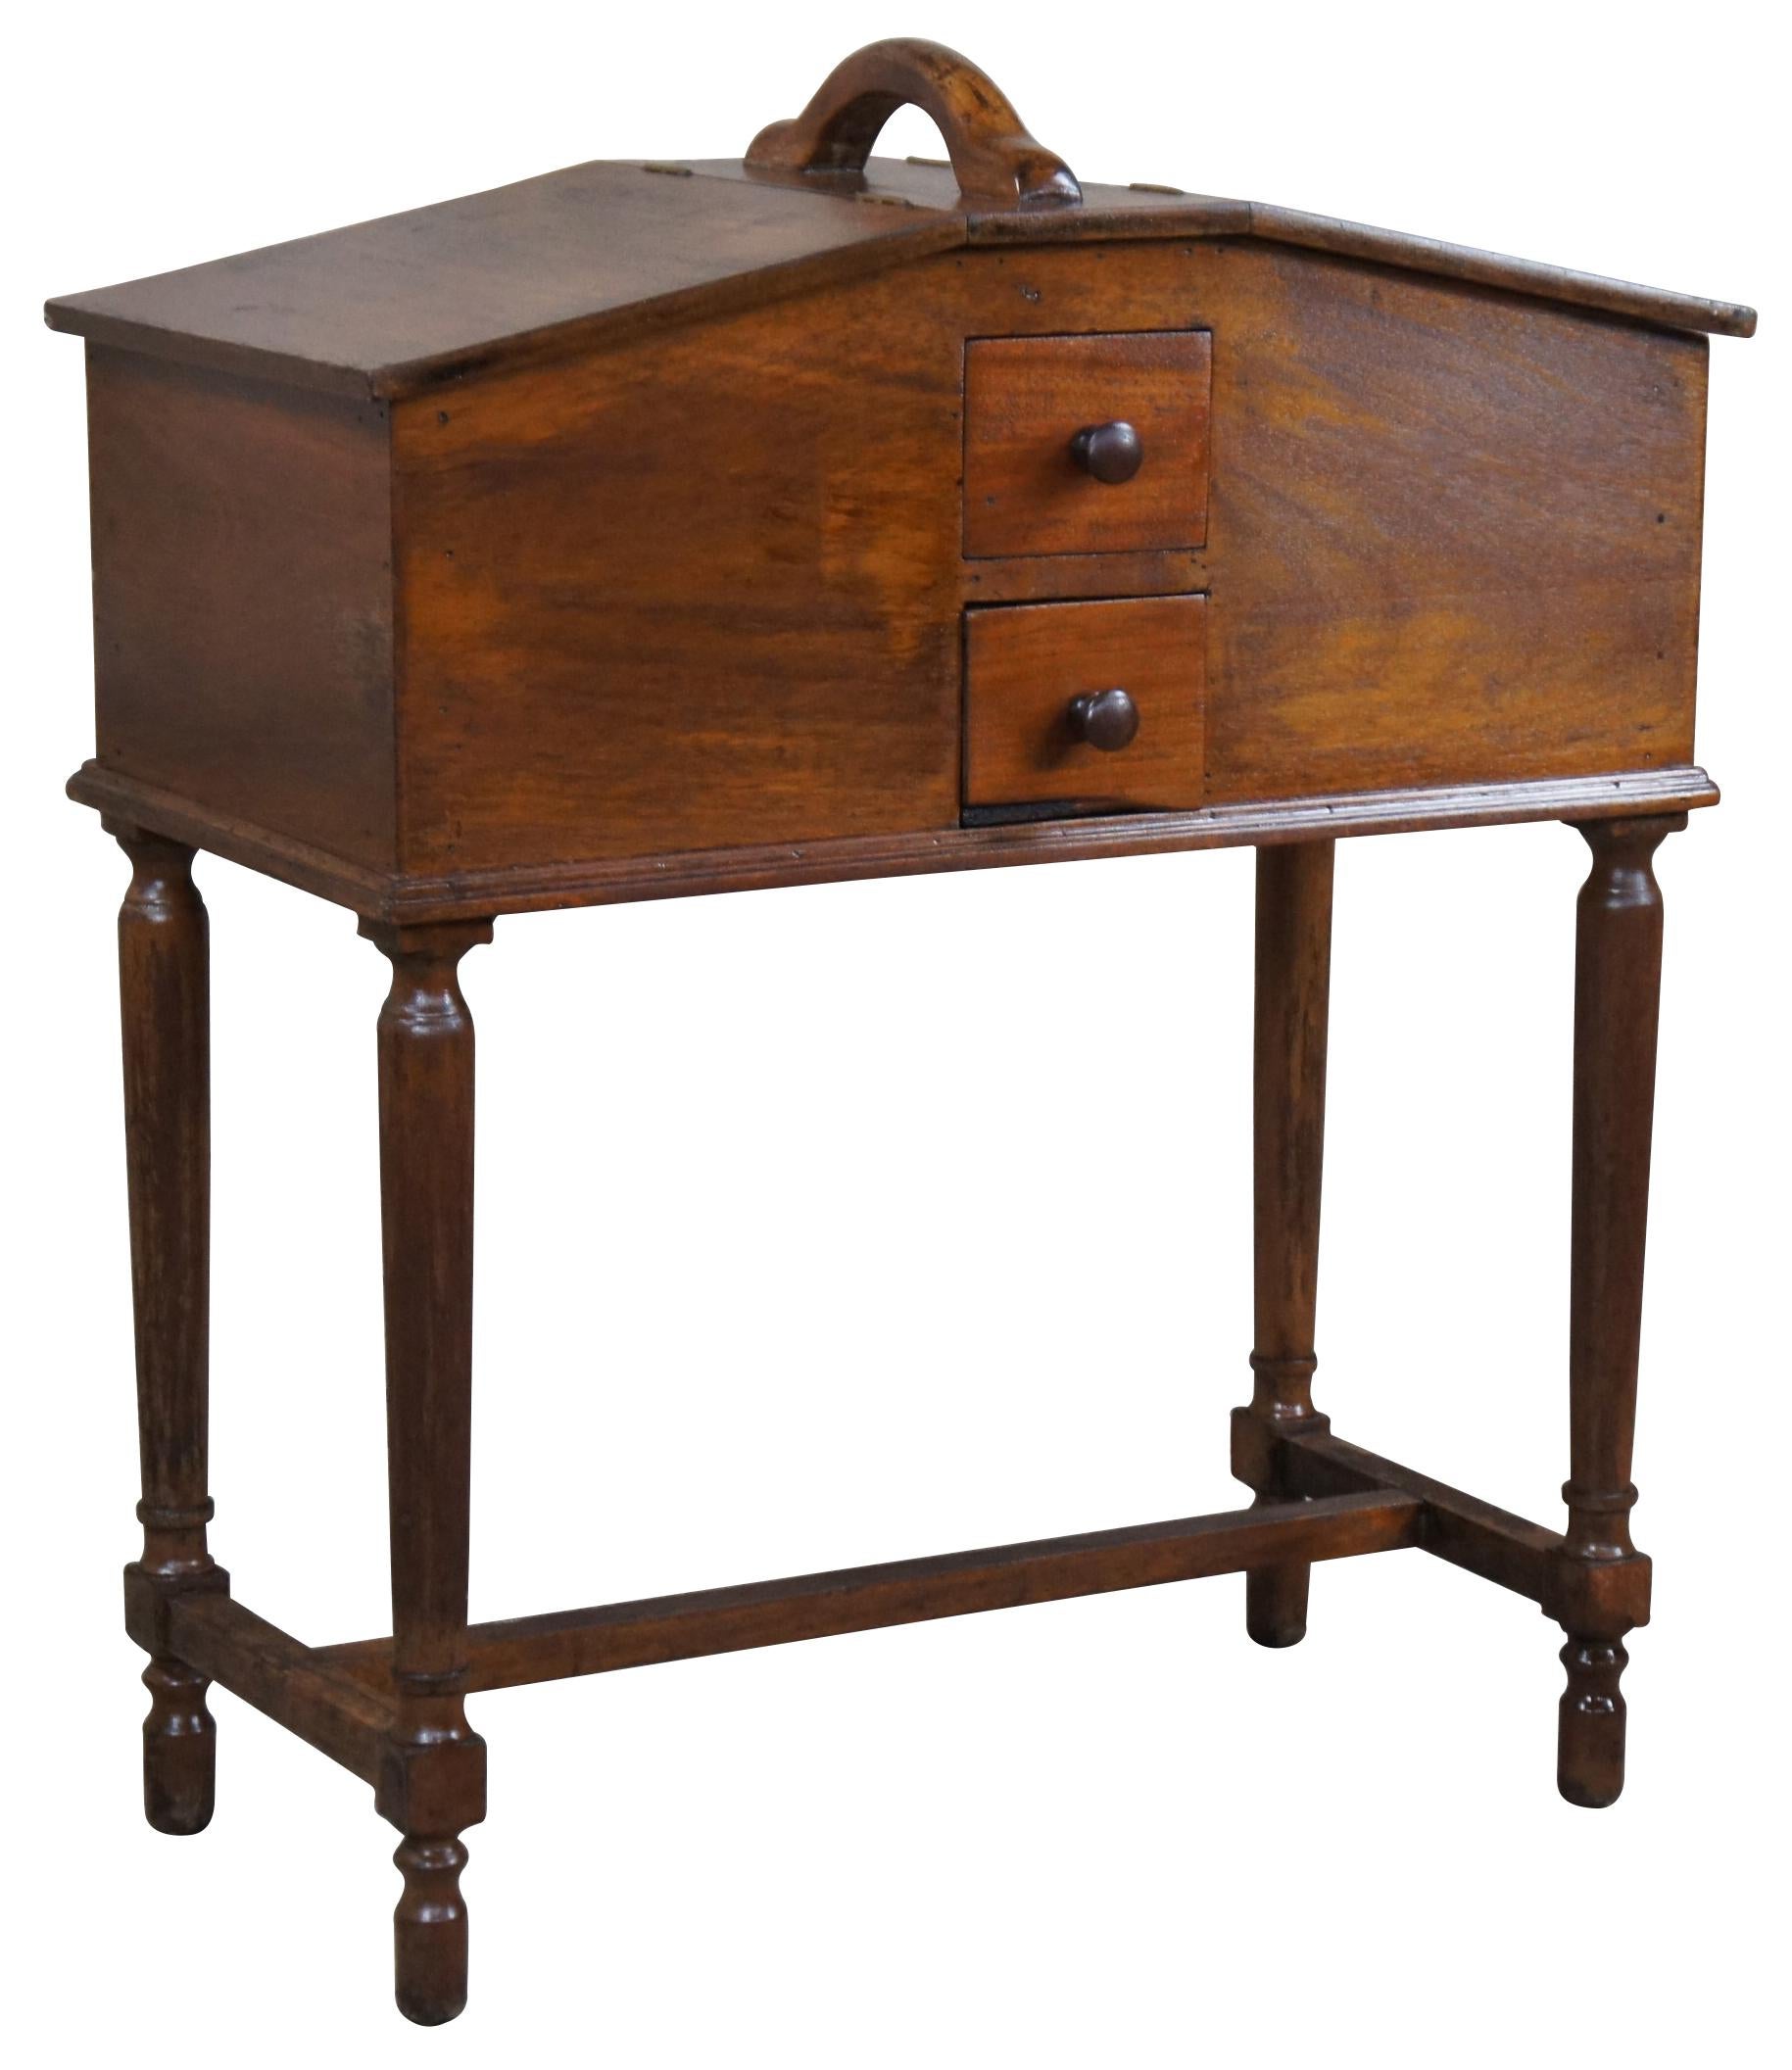 An unusual early 20th century sewing box or stand. Drawing inspiration from William & Mary styling. A rectangular form made from walnut with a house shaped body featuring two lidded boxes for storage, a handle for moving and two petite drawers at